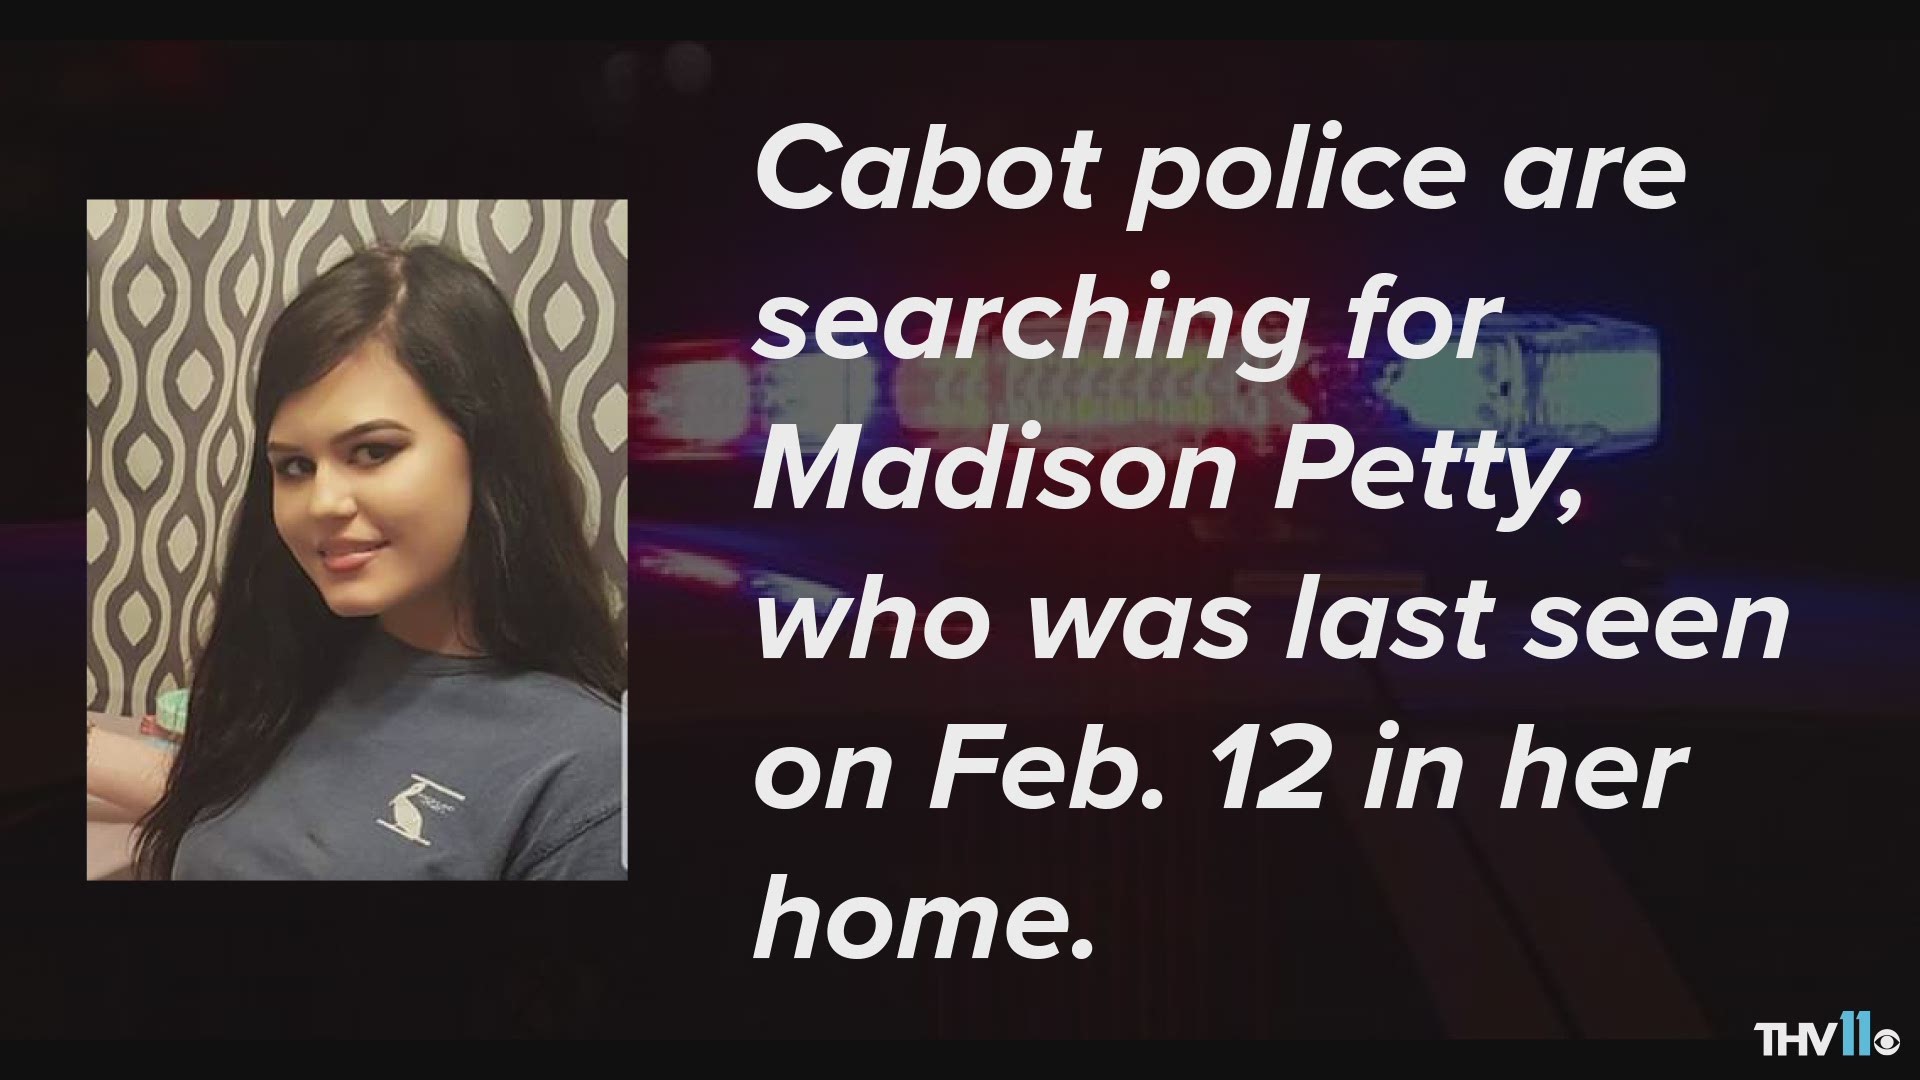 If anyone has information, please contact the Cabot Police Department at 501-843-6526.